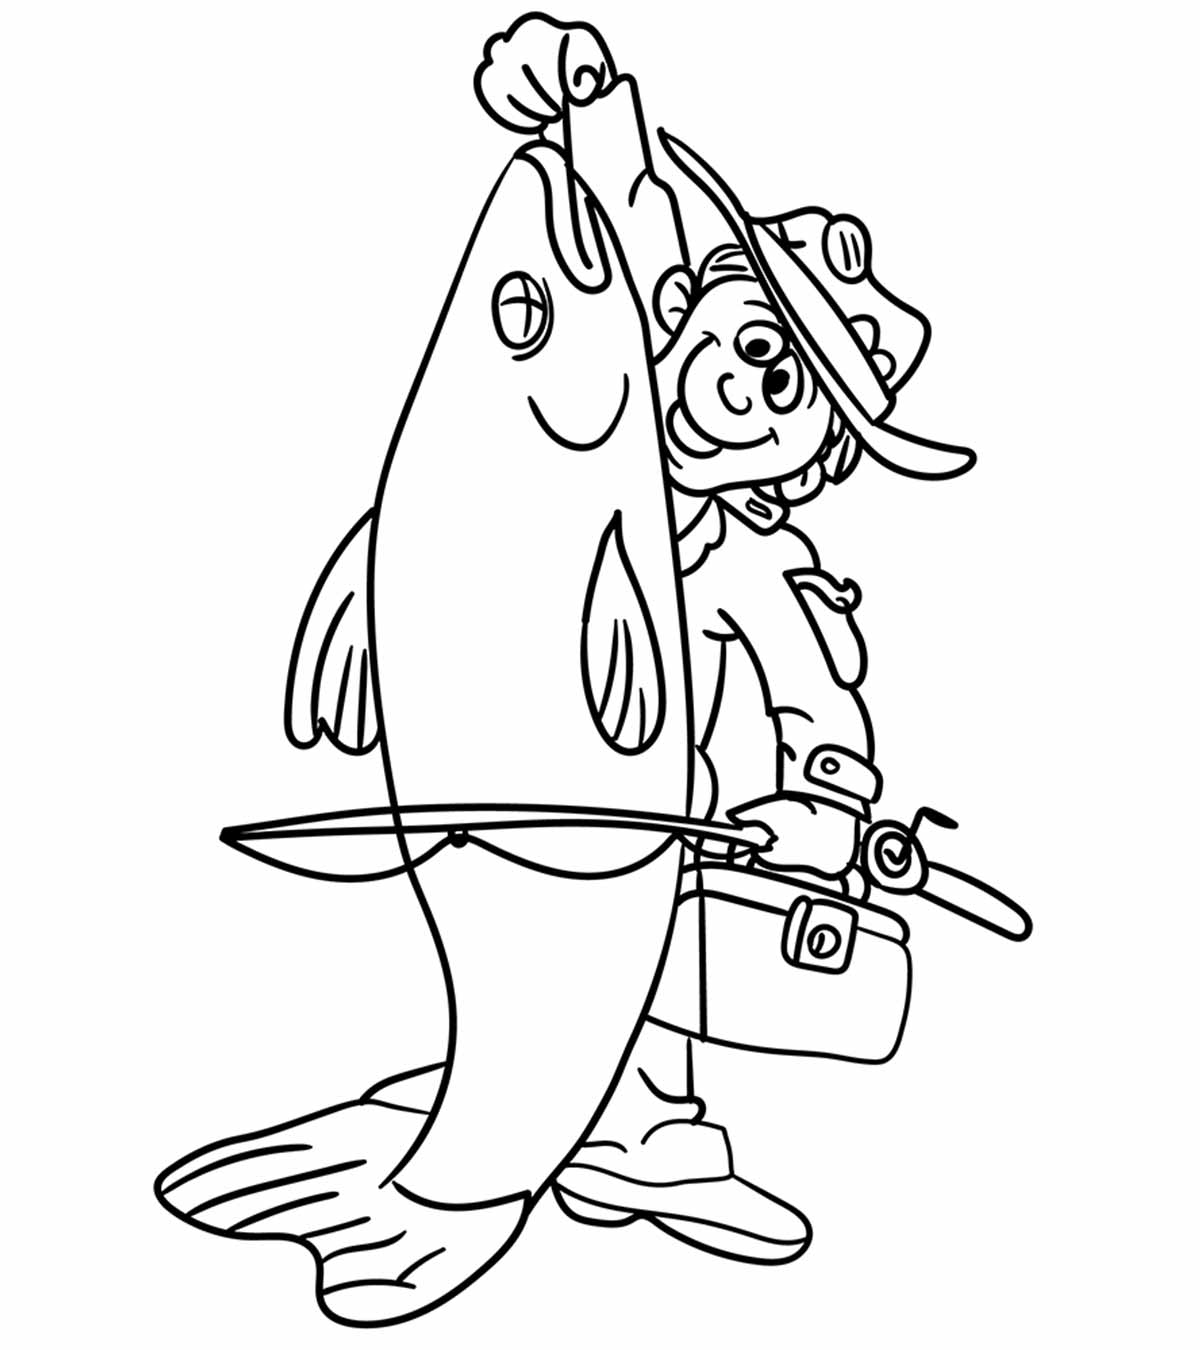 10 Fisherman Themed Coloring Pages For Your Kids